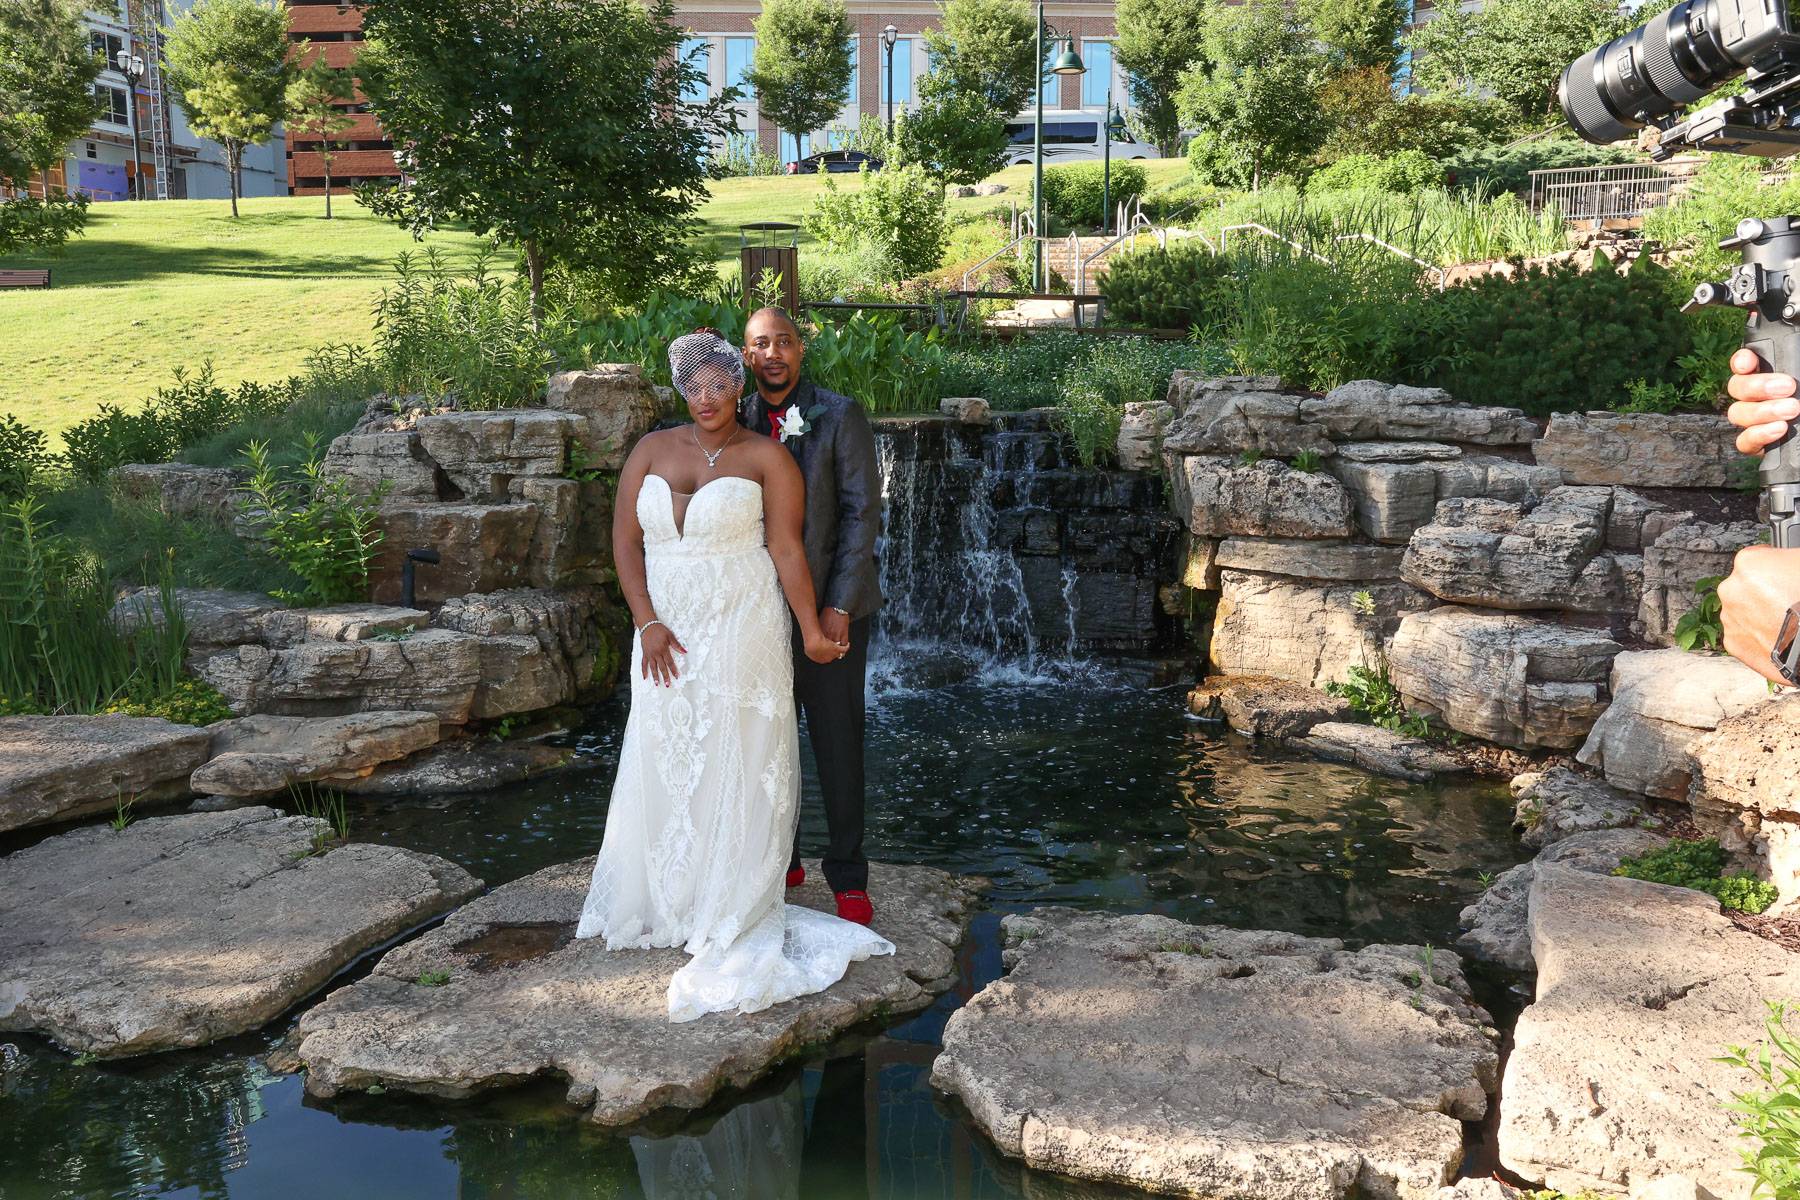 The newlyweds standing by a pond and waterfall